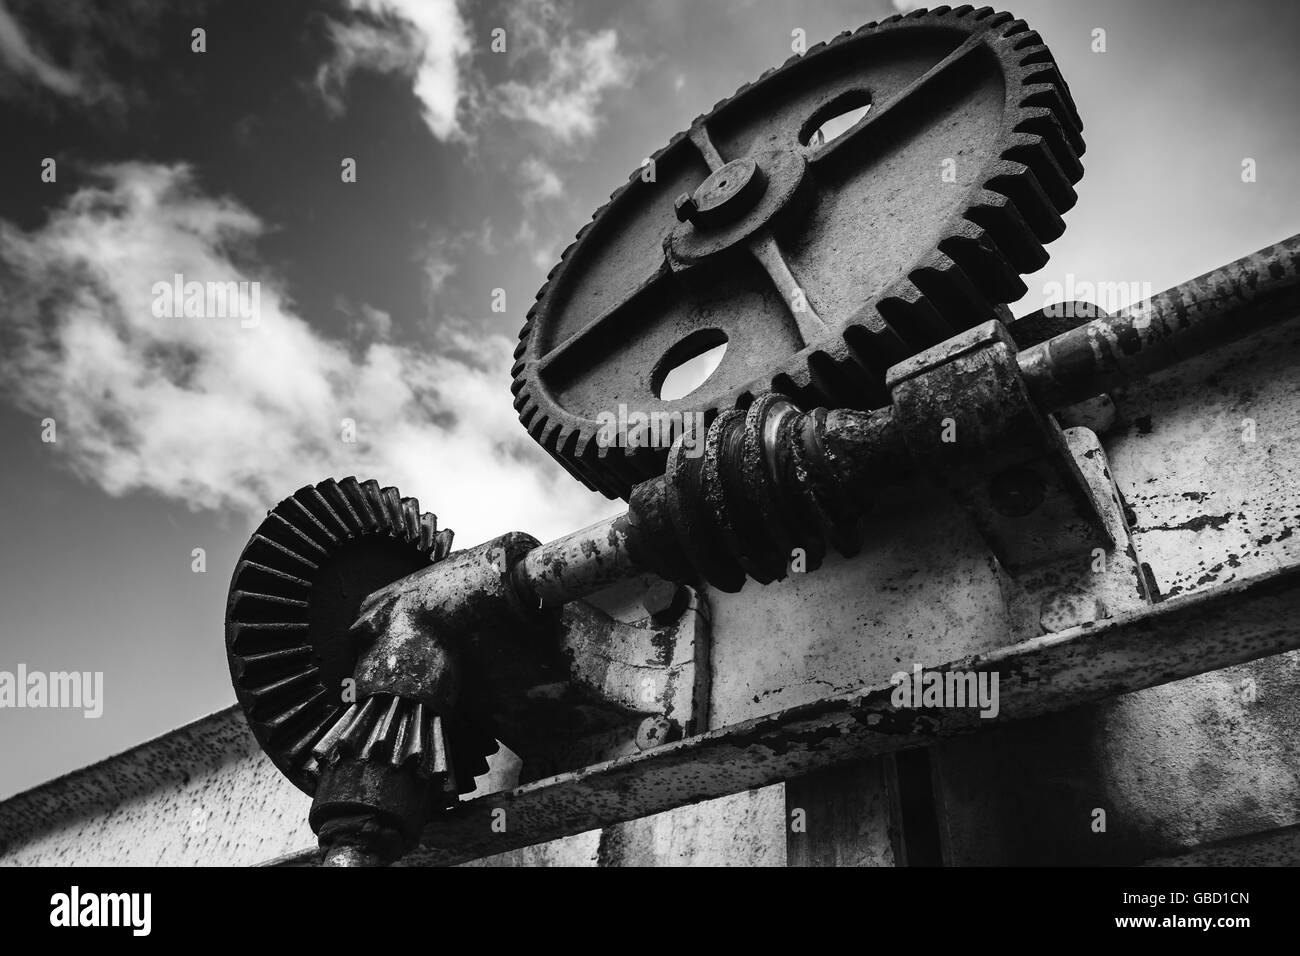 Old rusted gears under dramatic sky background, close-up black and white photo with selective focus Stock Photo